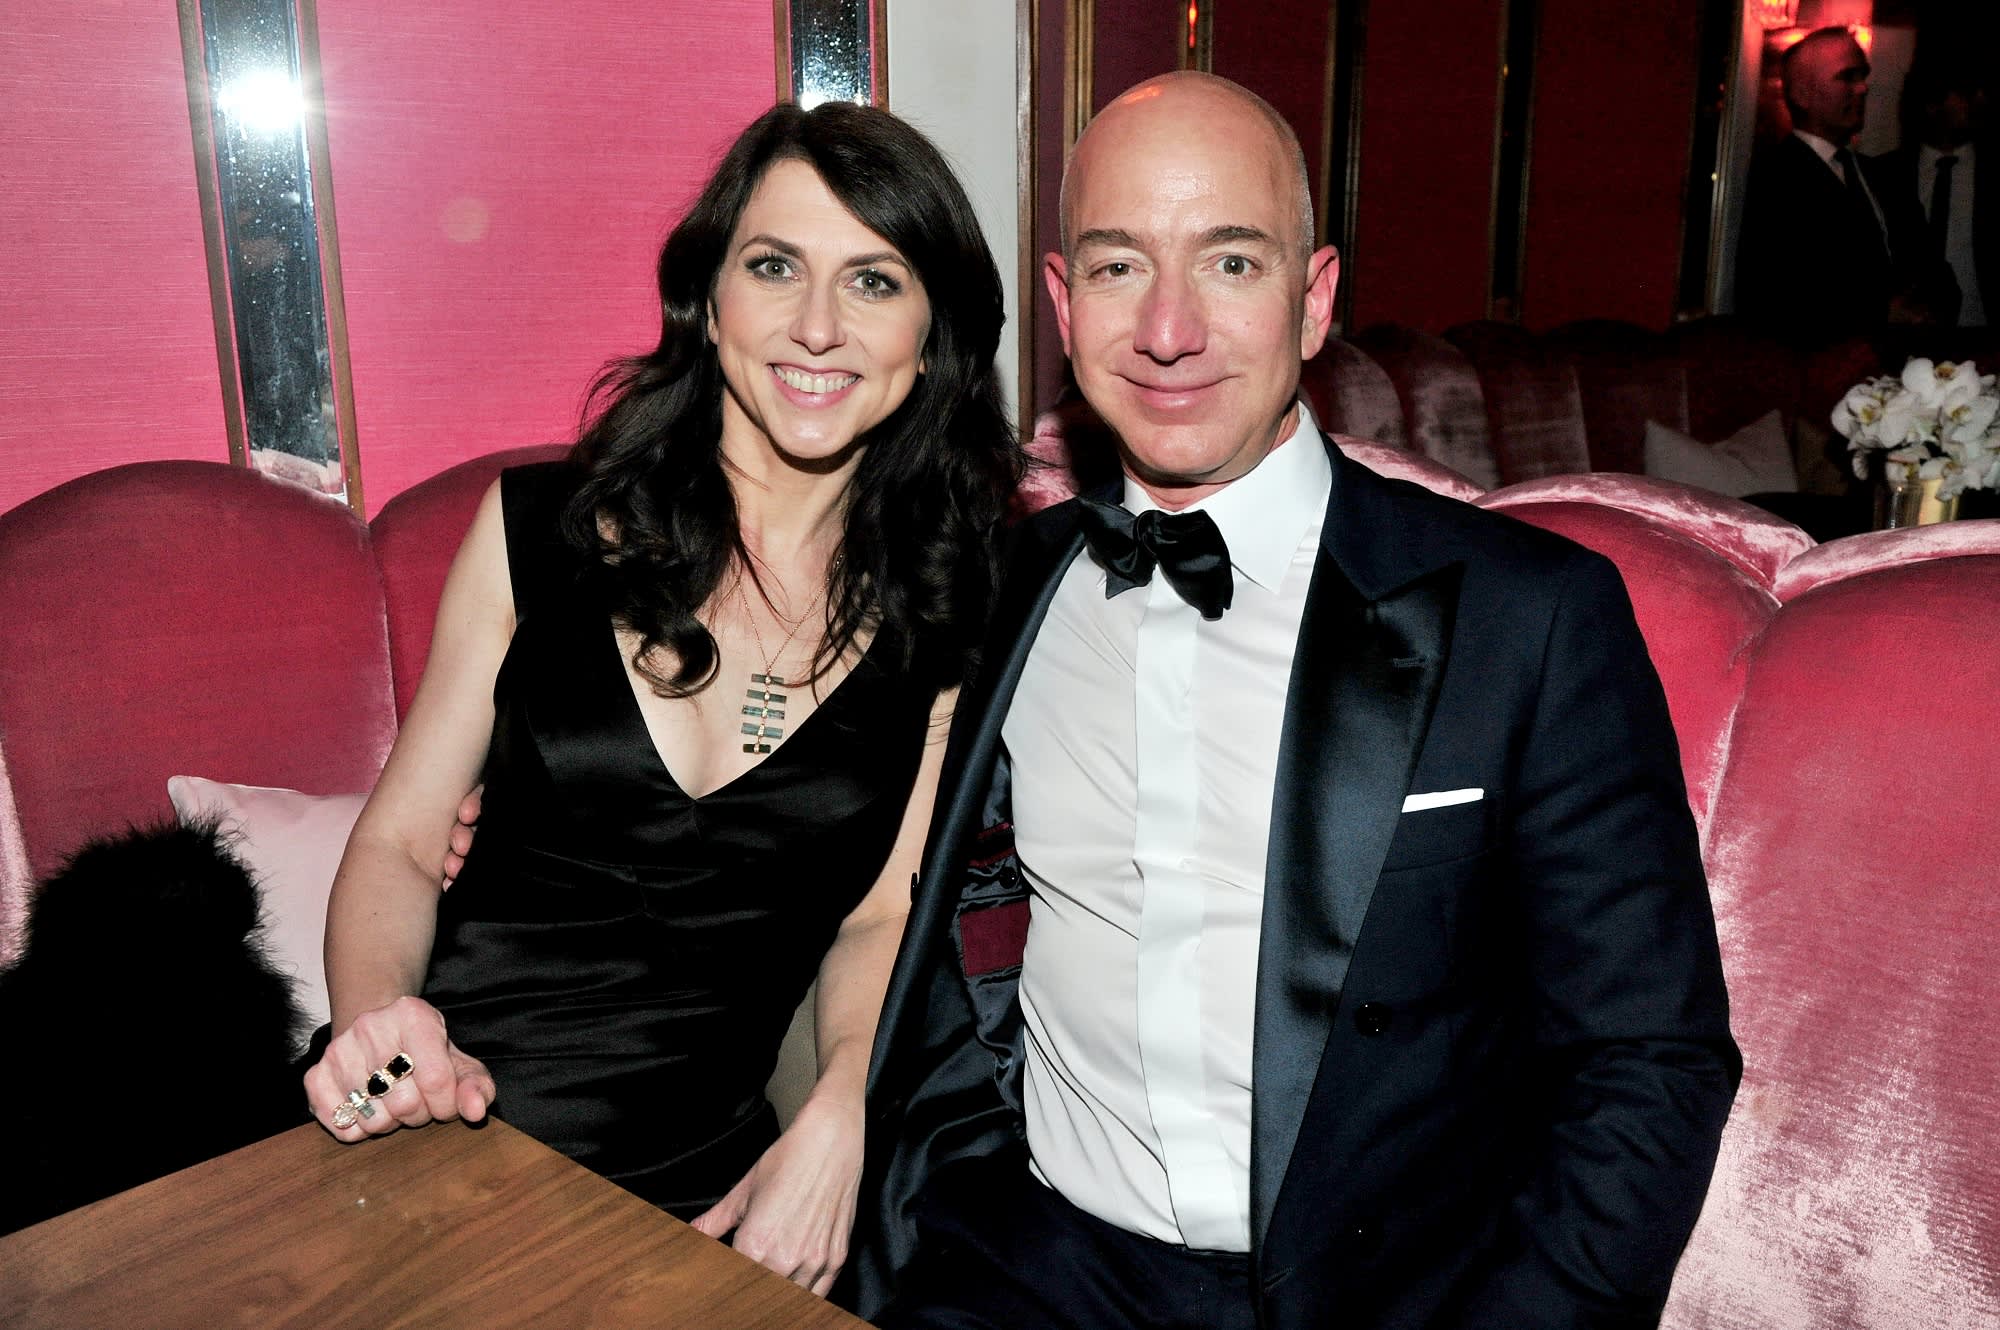 Jeff Bezos suggests you try this